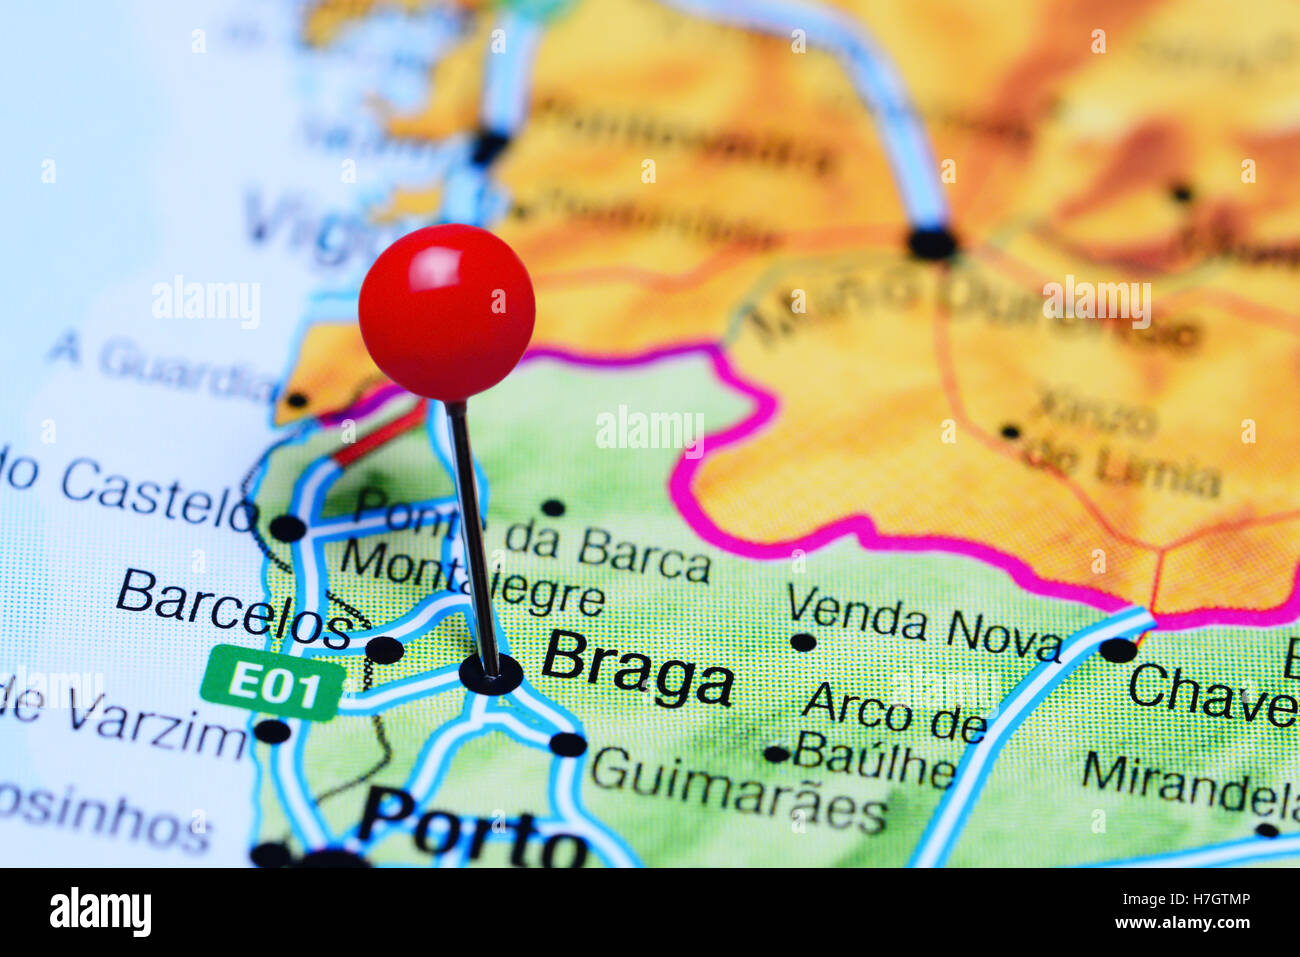 Braga pinned on a map of Portugal Stock Photo